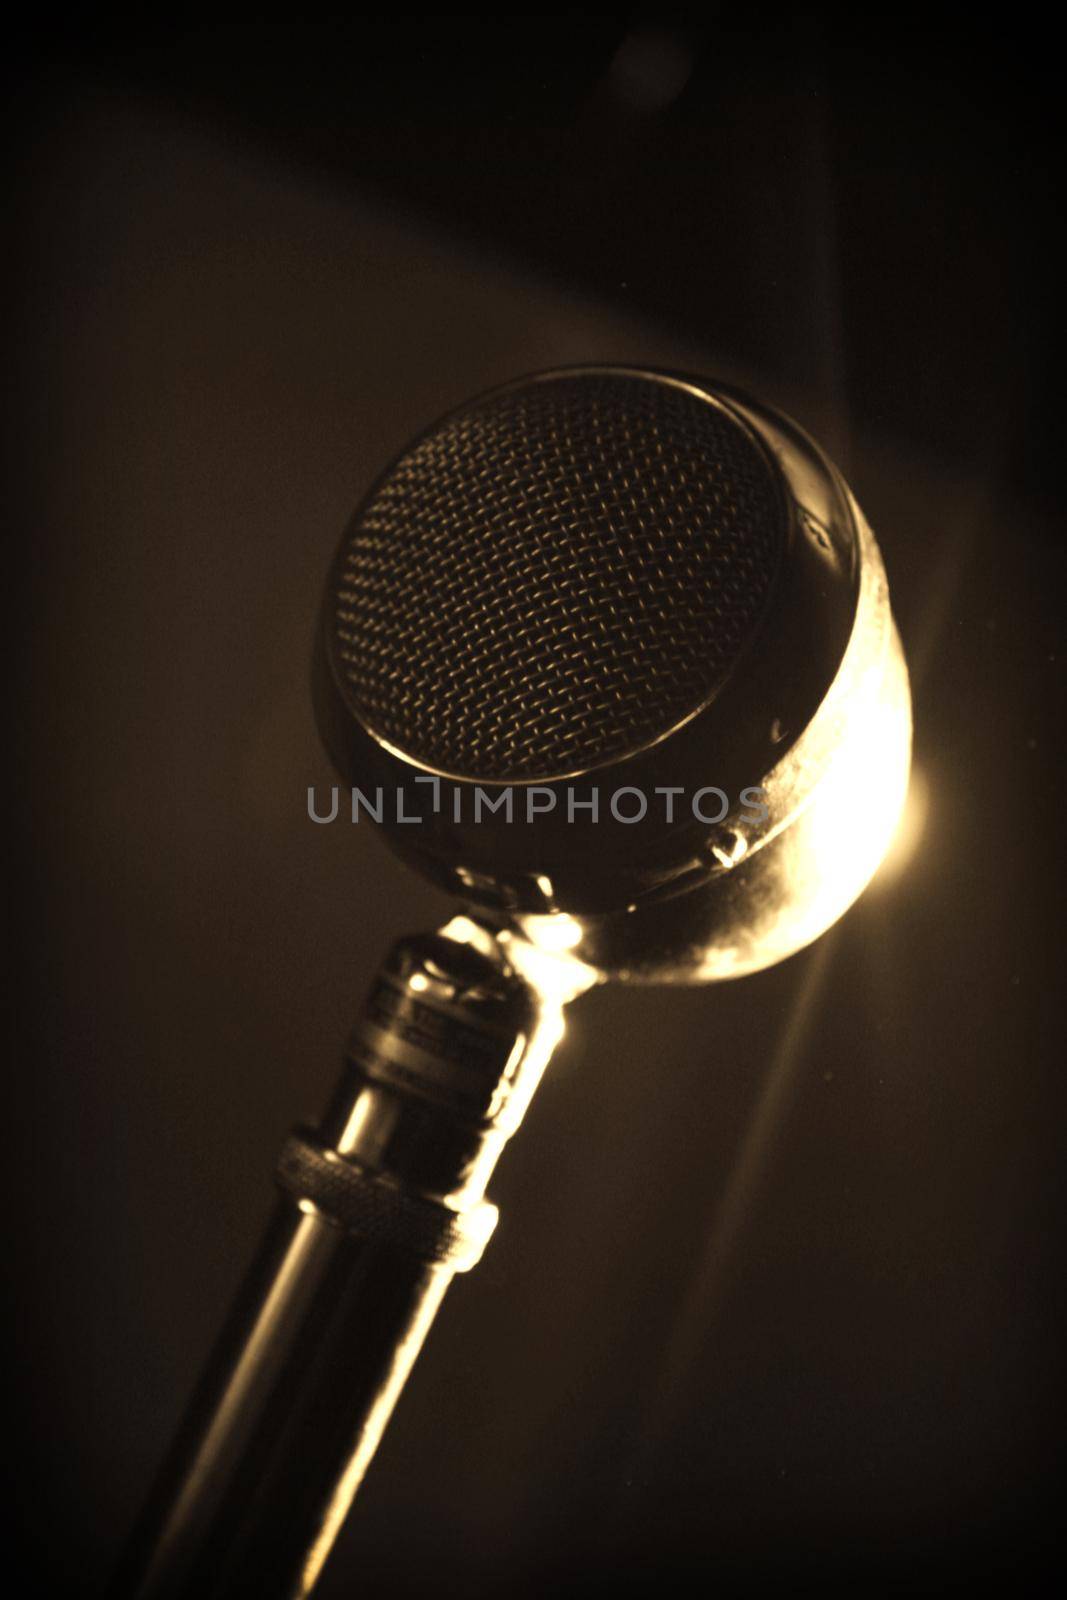 Image of Old metal circular microphone with a gold lens flare